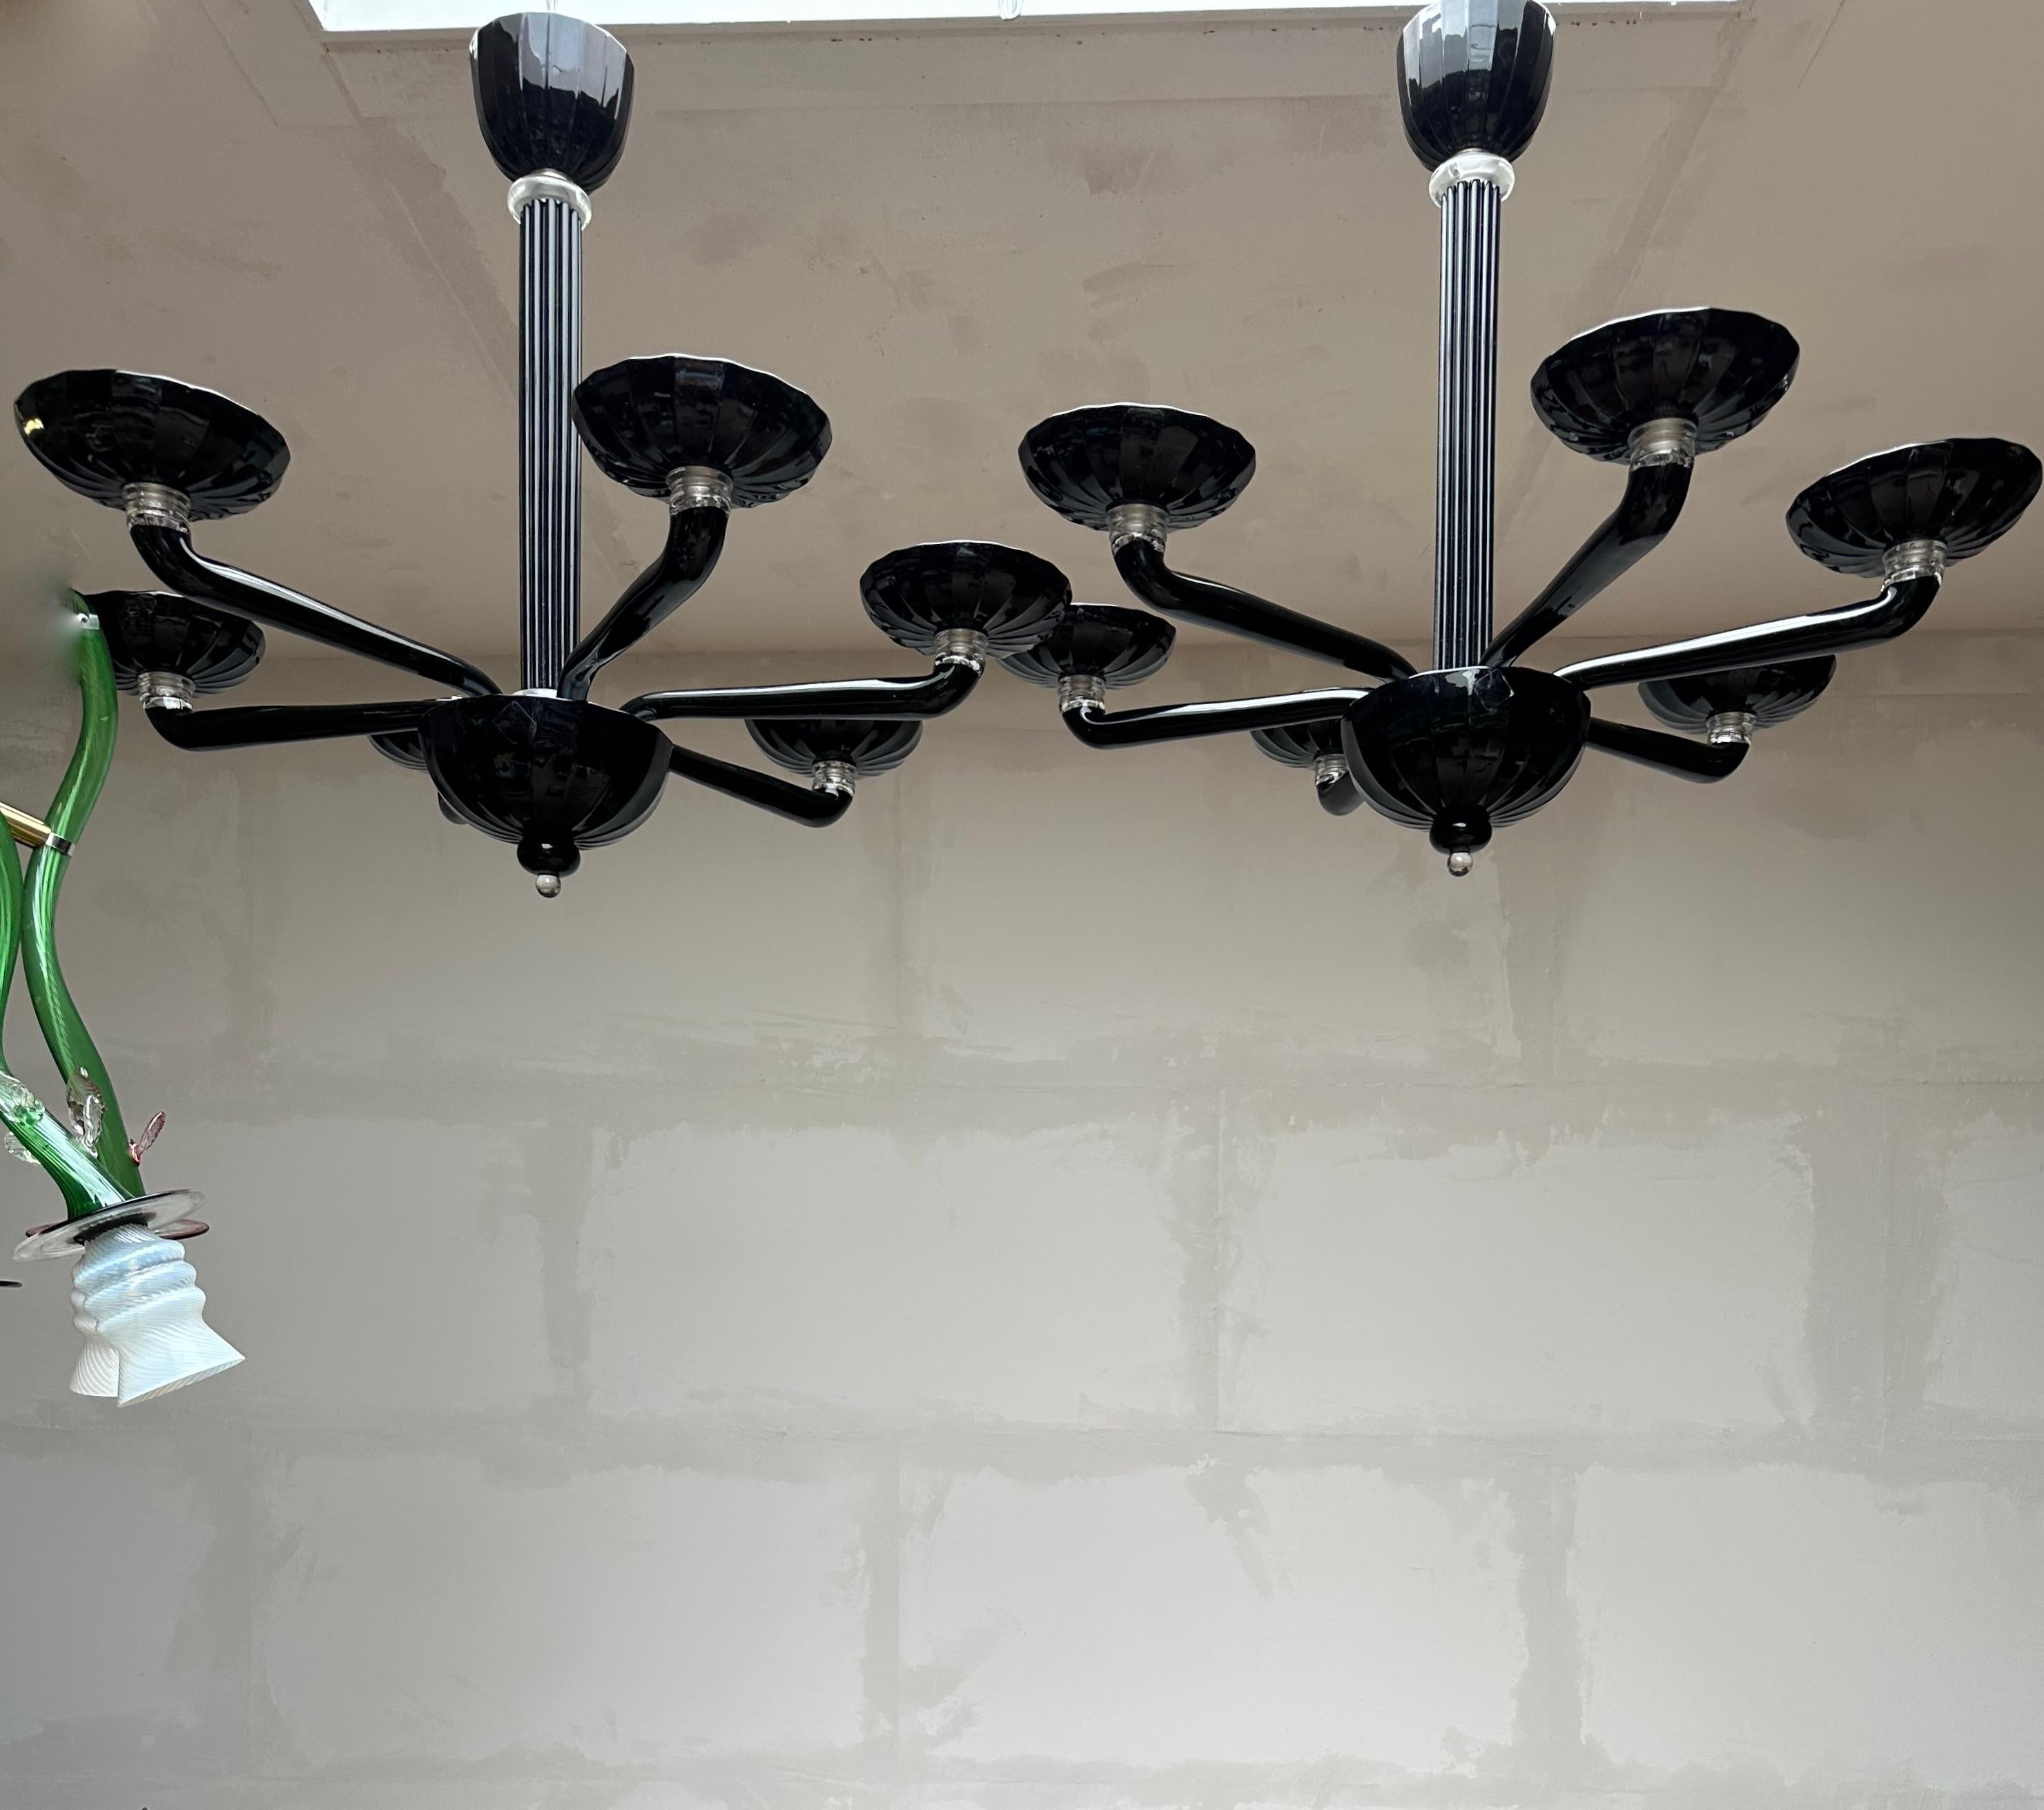 Wonderful, good size and mint condition pair of Venetian, black art glass pendant lights.

If you are looking for a rare and truly stylish pair of Murano art glass fixtures to grace your home then these handmade chandeliers could be perfect. With